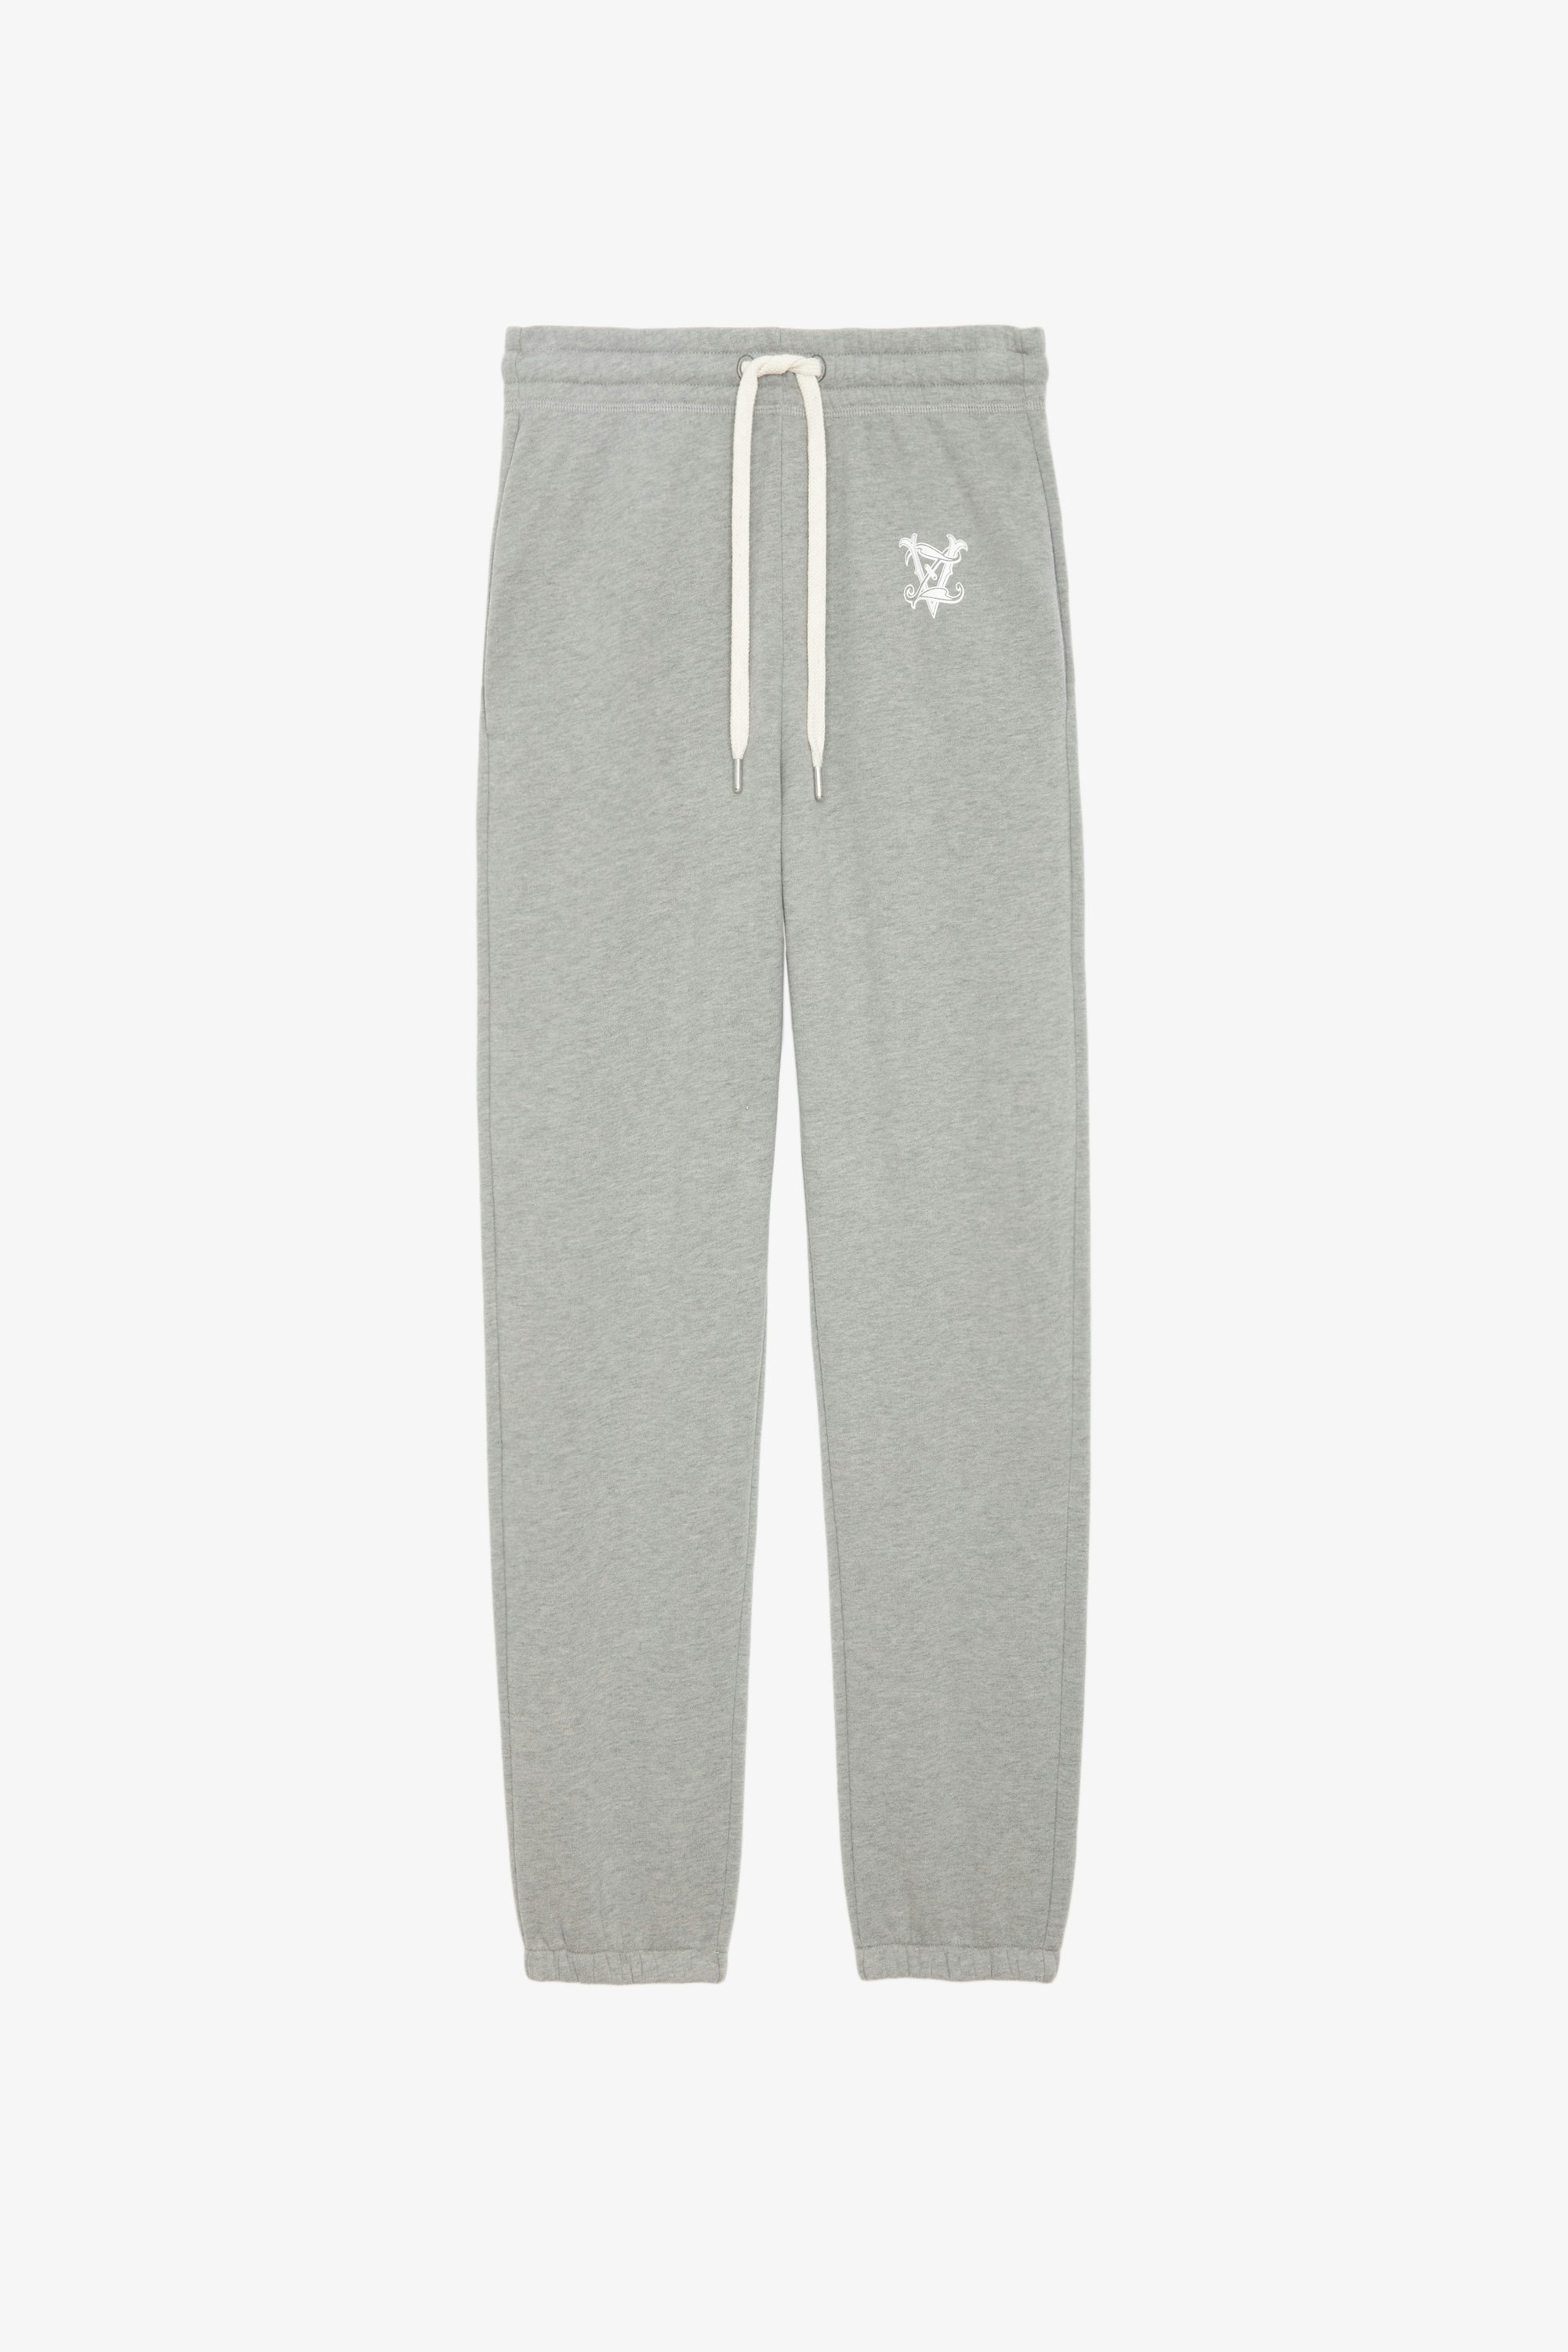 Sofia Jogging Bottoms - Grey jogging bottoms with drawstring ties and ZV print.